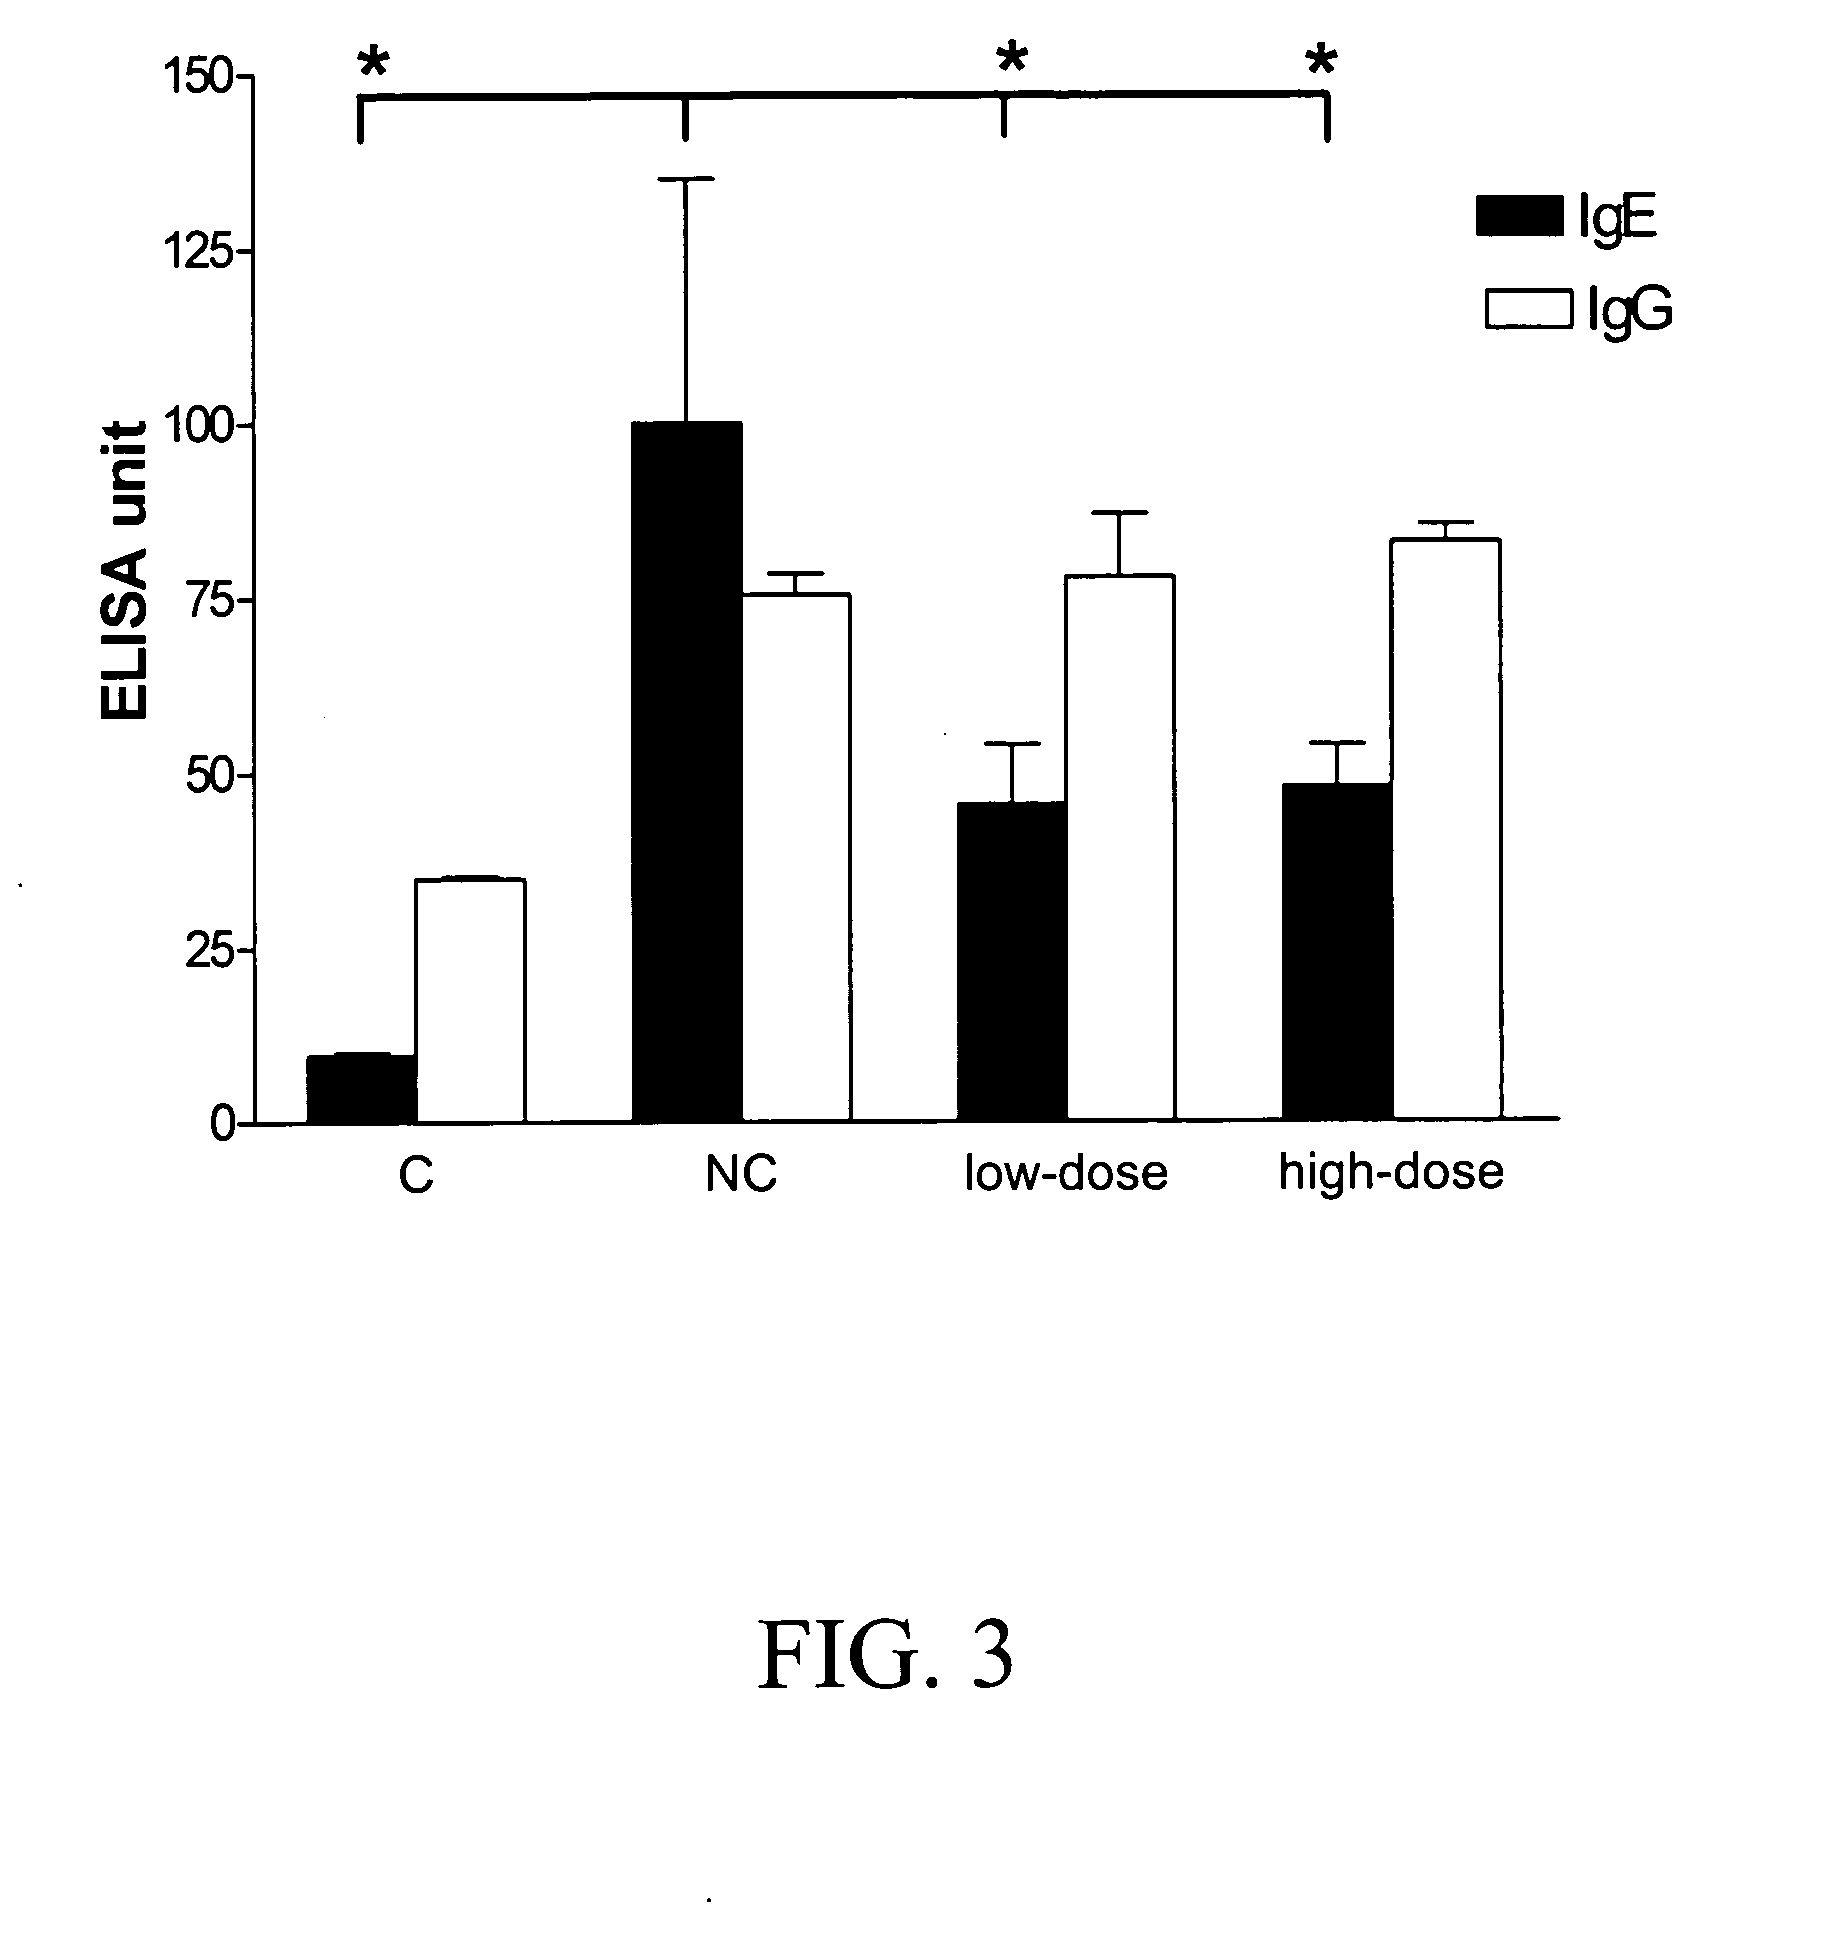 Process for producing dust mite allergen